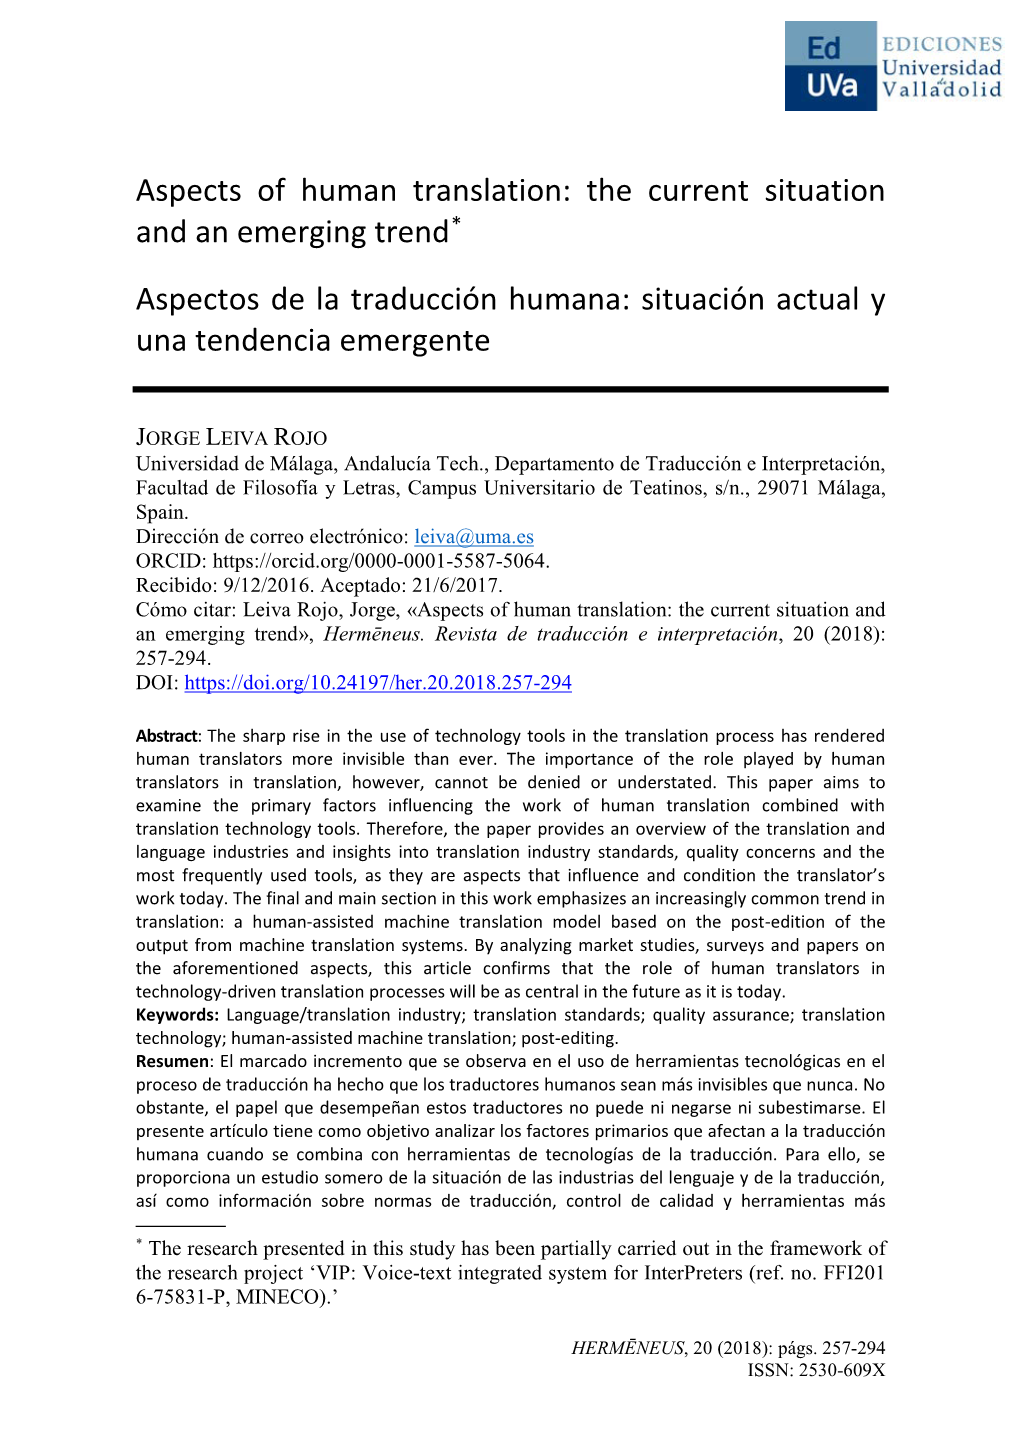 Aspects of Human Translation: the Current Situation and an Emerging Trend*